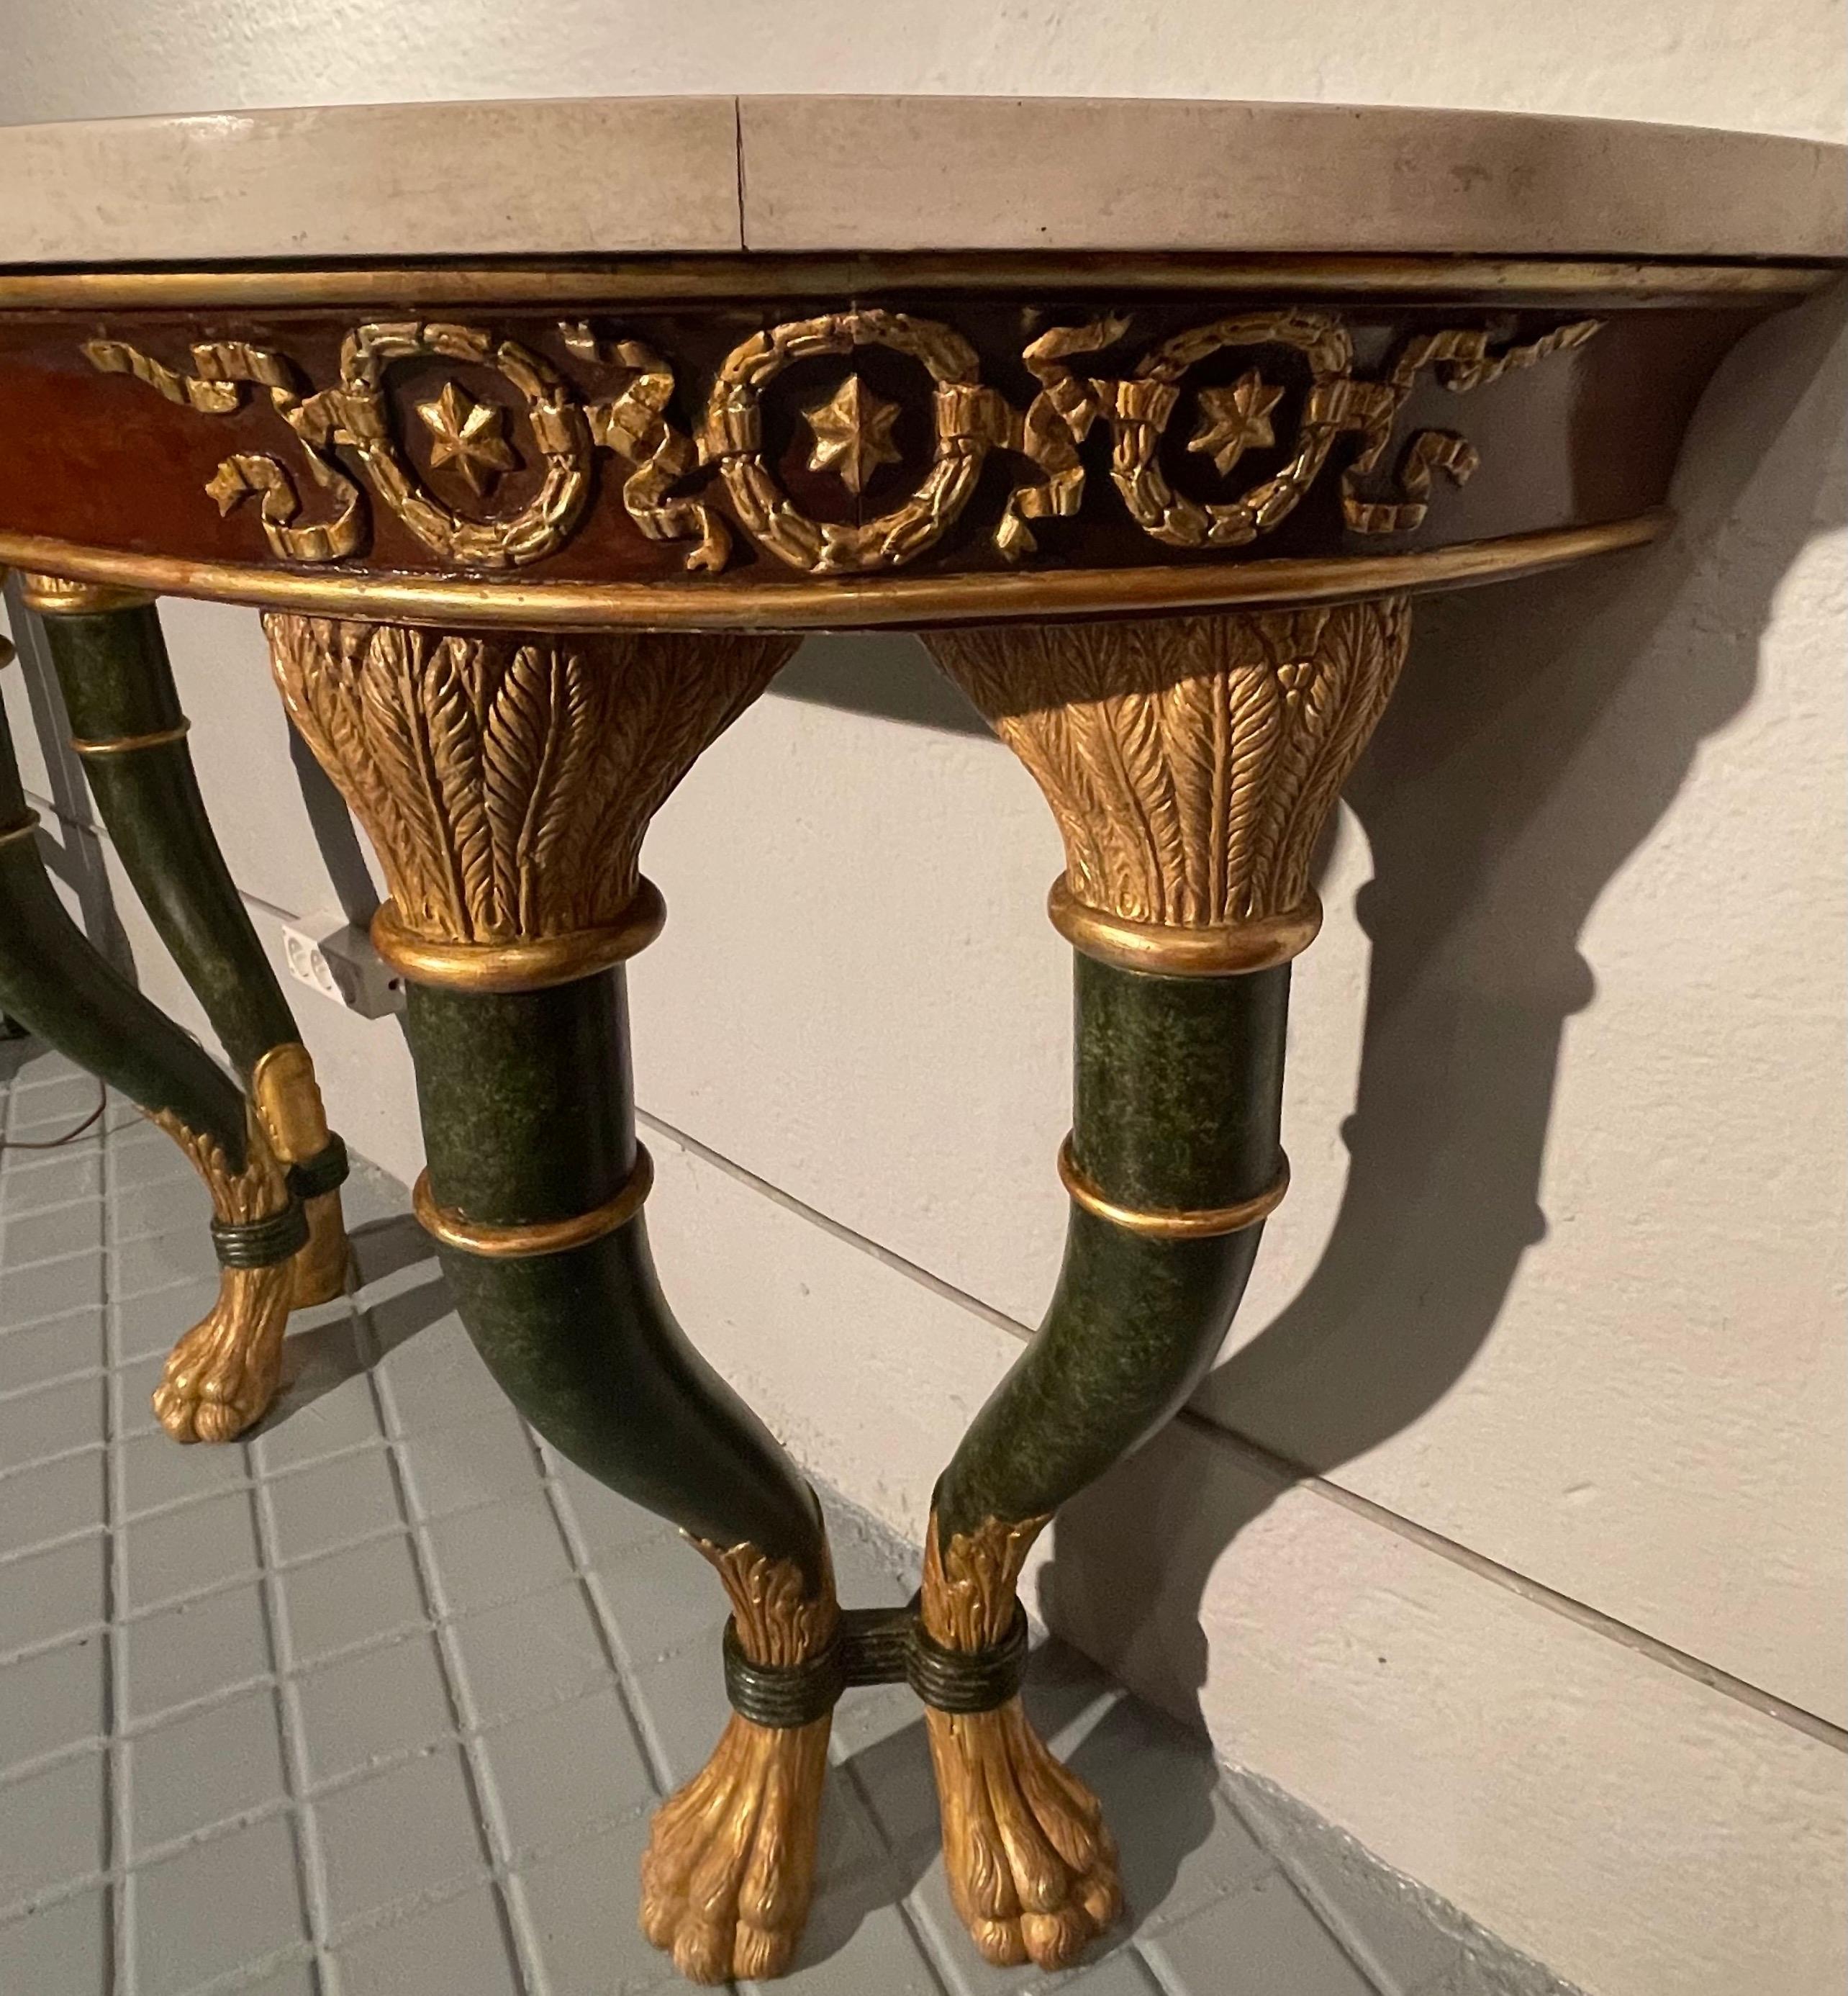 Pair of Sicilians Consoles Made of Wood with Gilding and Stucco, 19th Century For Sale 4